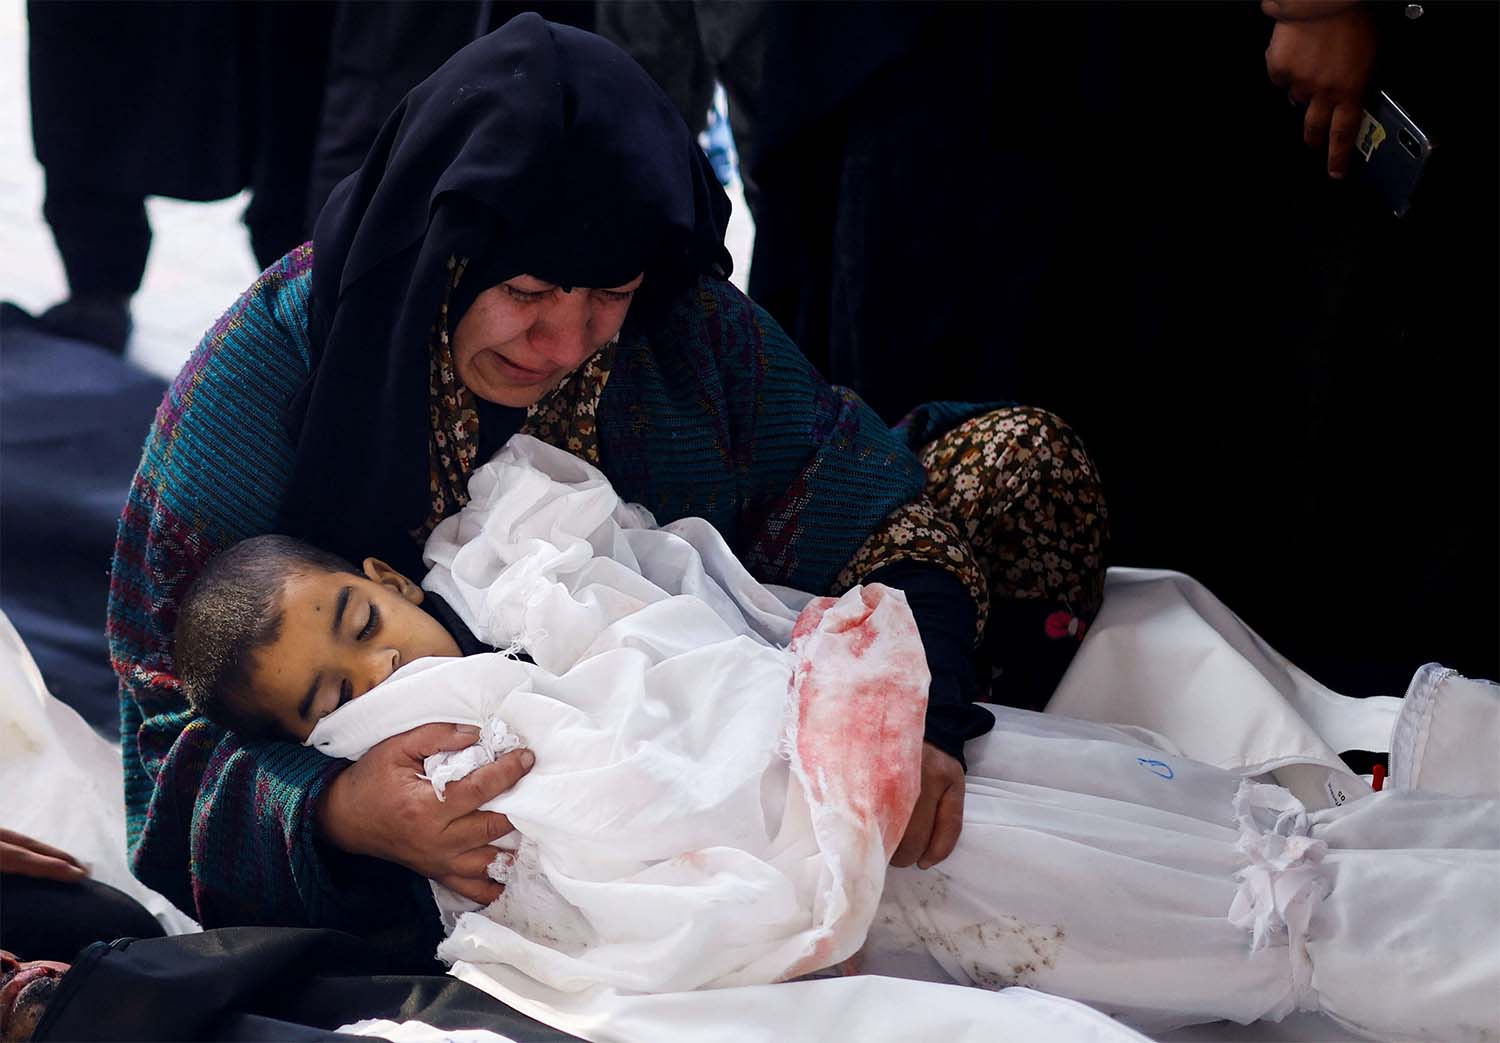  A Palestinian woman holds the body of a Palestinian child killed in Israeli strikes on Rafah